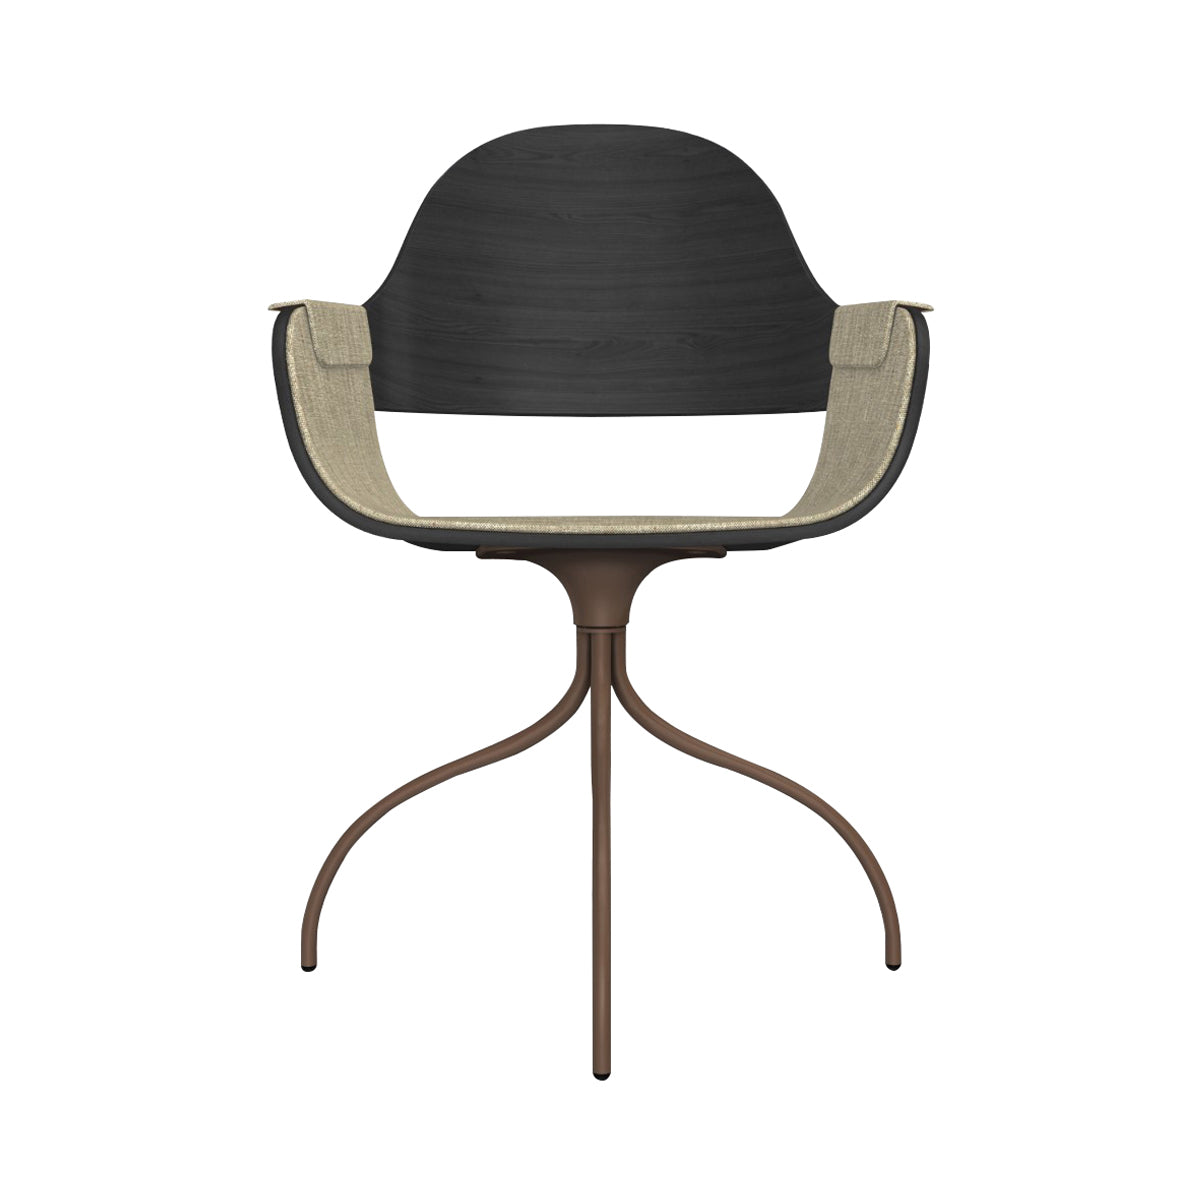 Showtime Nude Chair with Swivel Base: Interior Seat + Armrest Upholstered + Ash Stained Black + Pale Brown